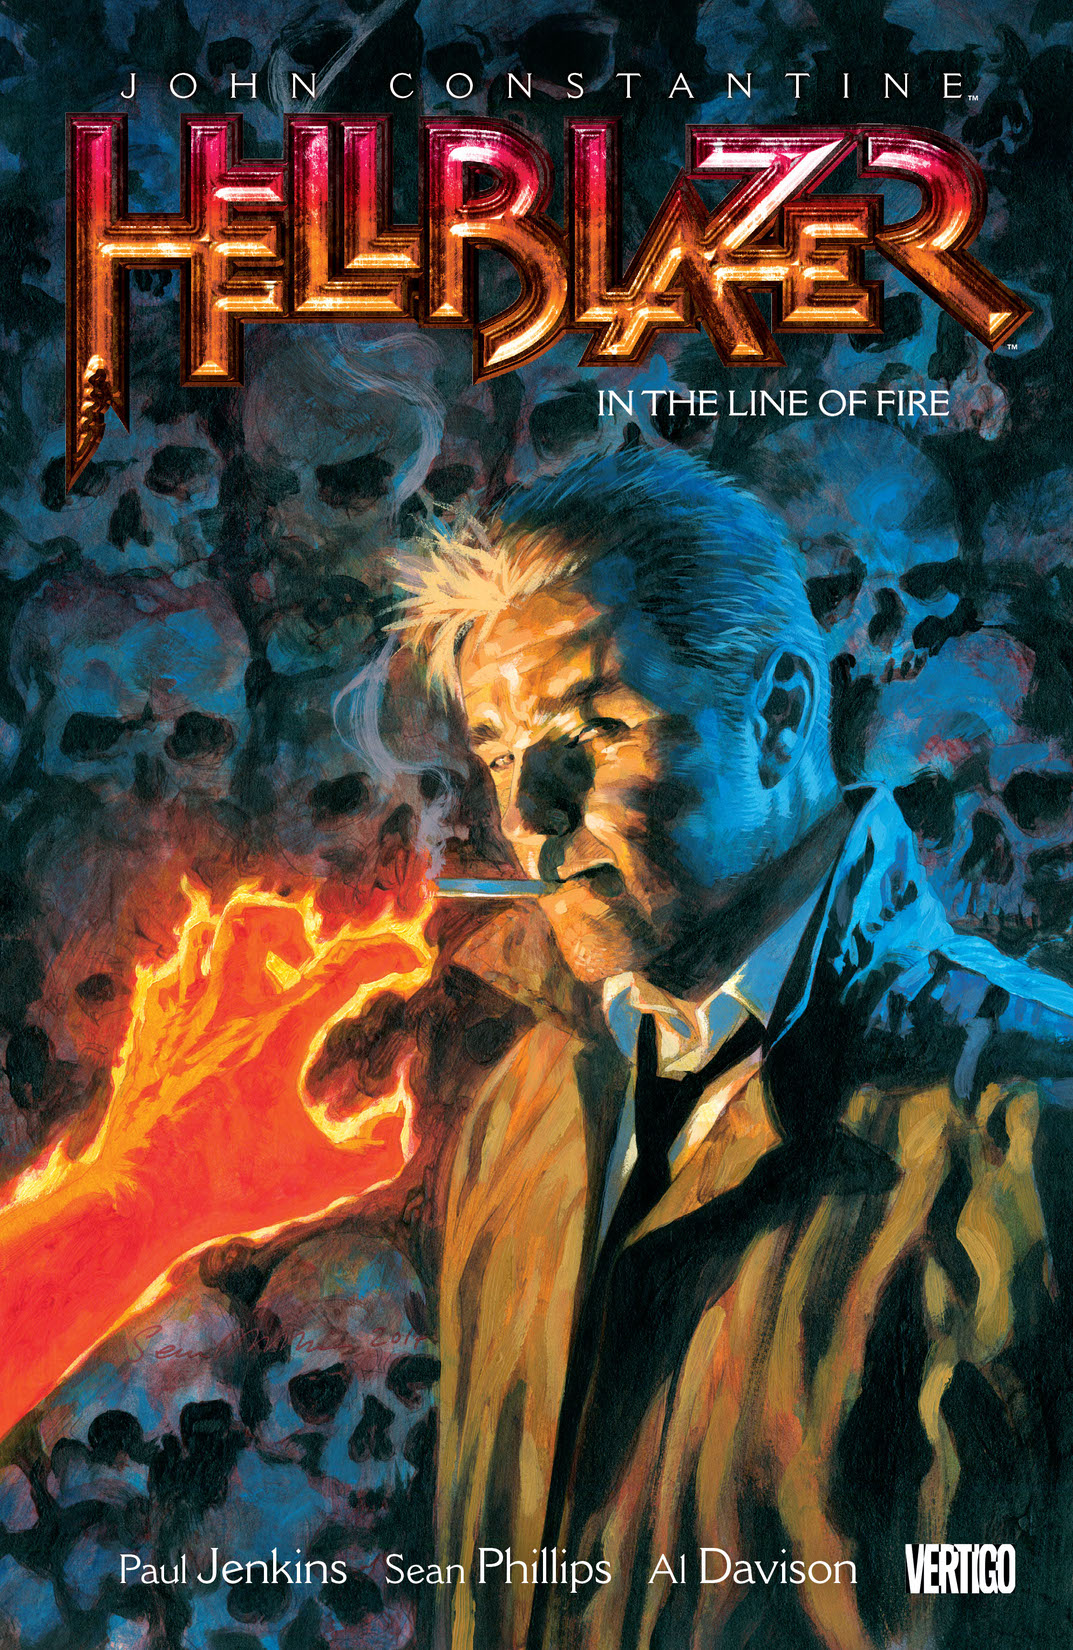 John Constantine Hellblazer Vol. 10: In The Line Of Fire preview images